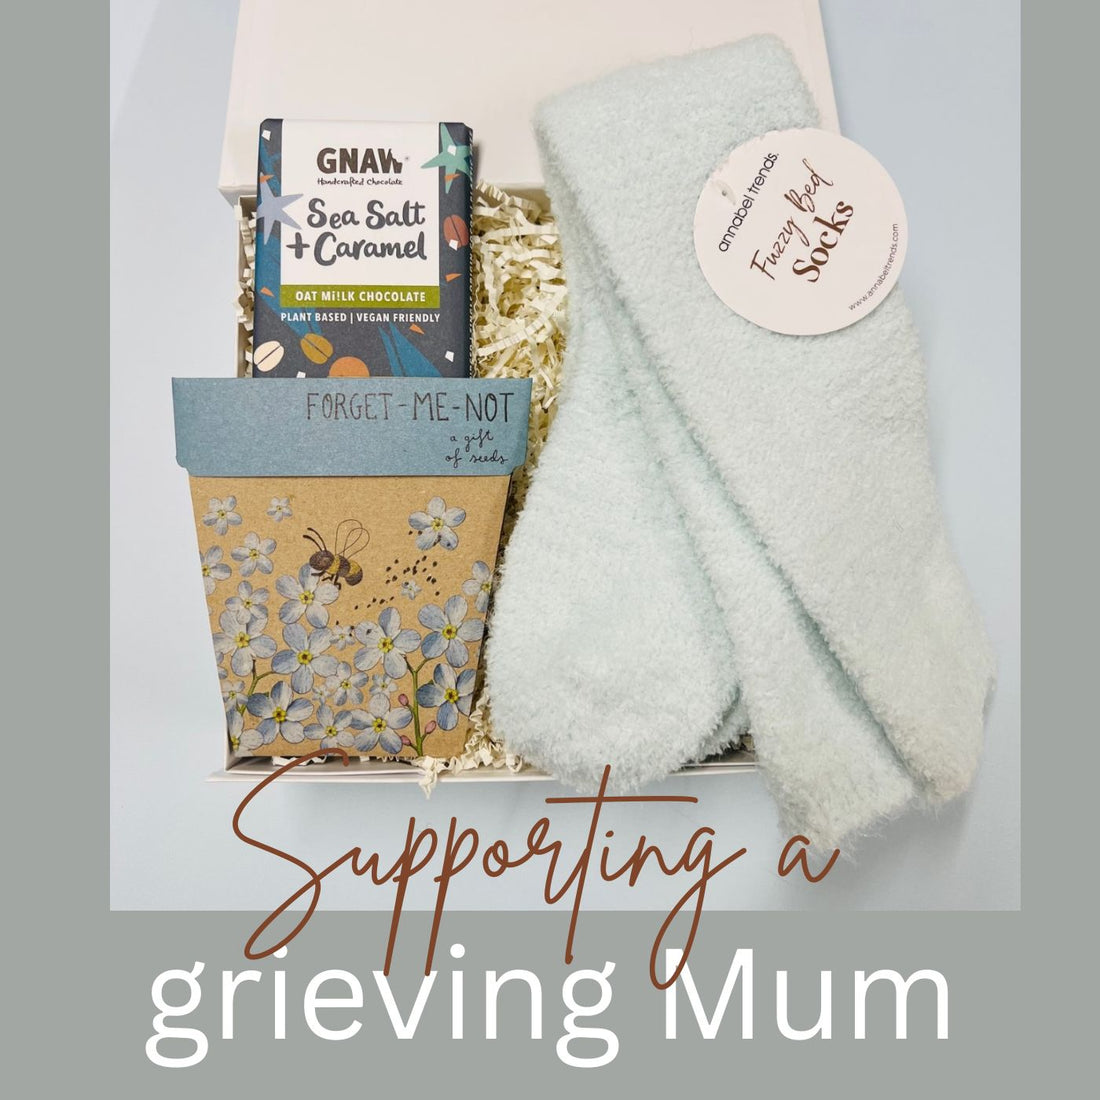 10 ways to support a grieving Mum this Mother's Day